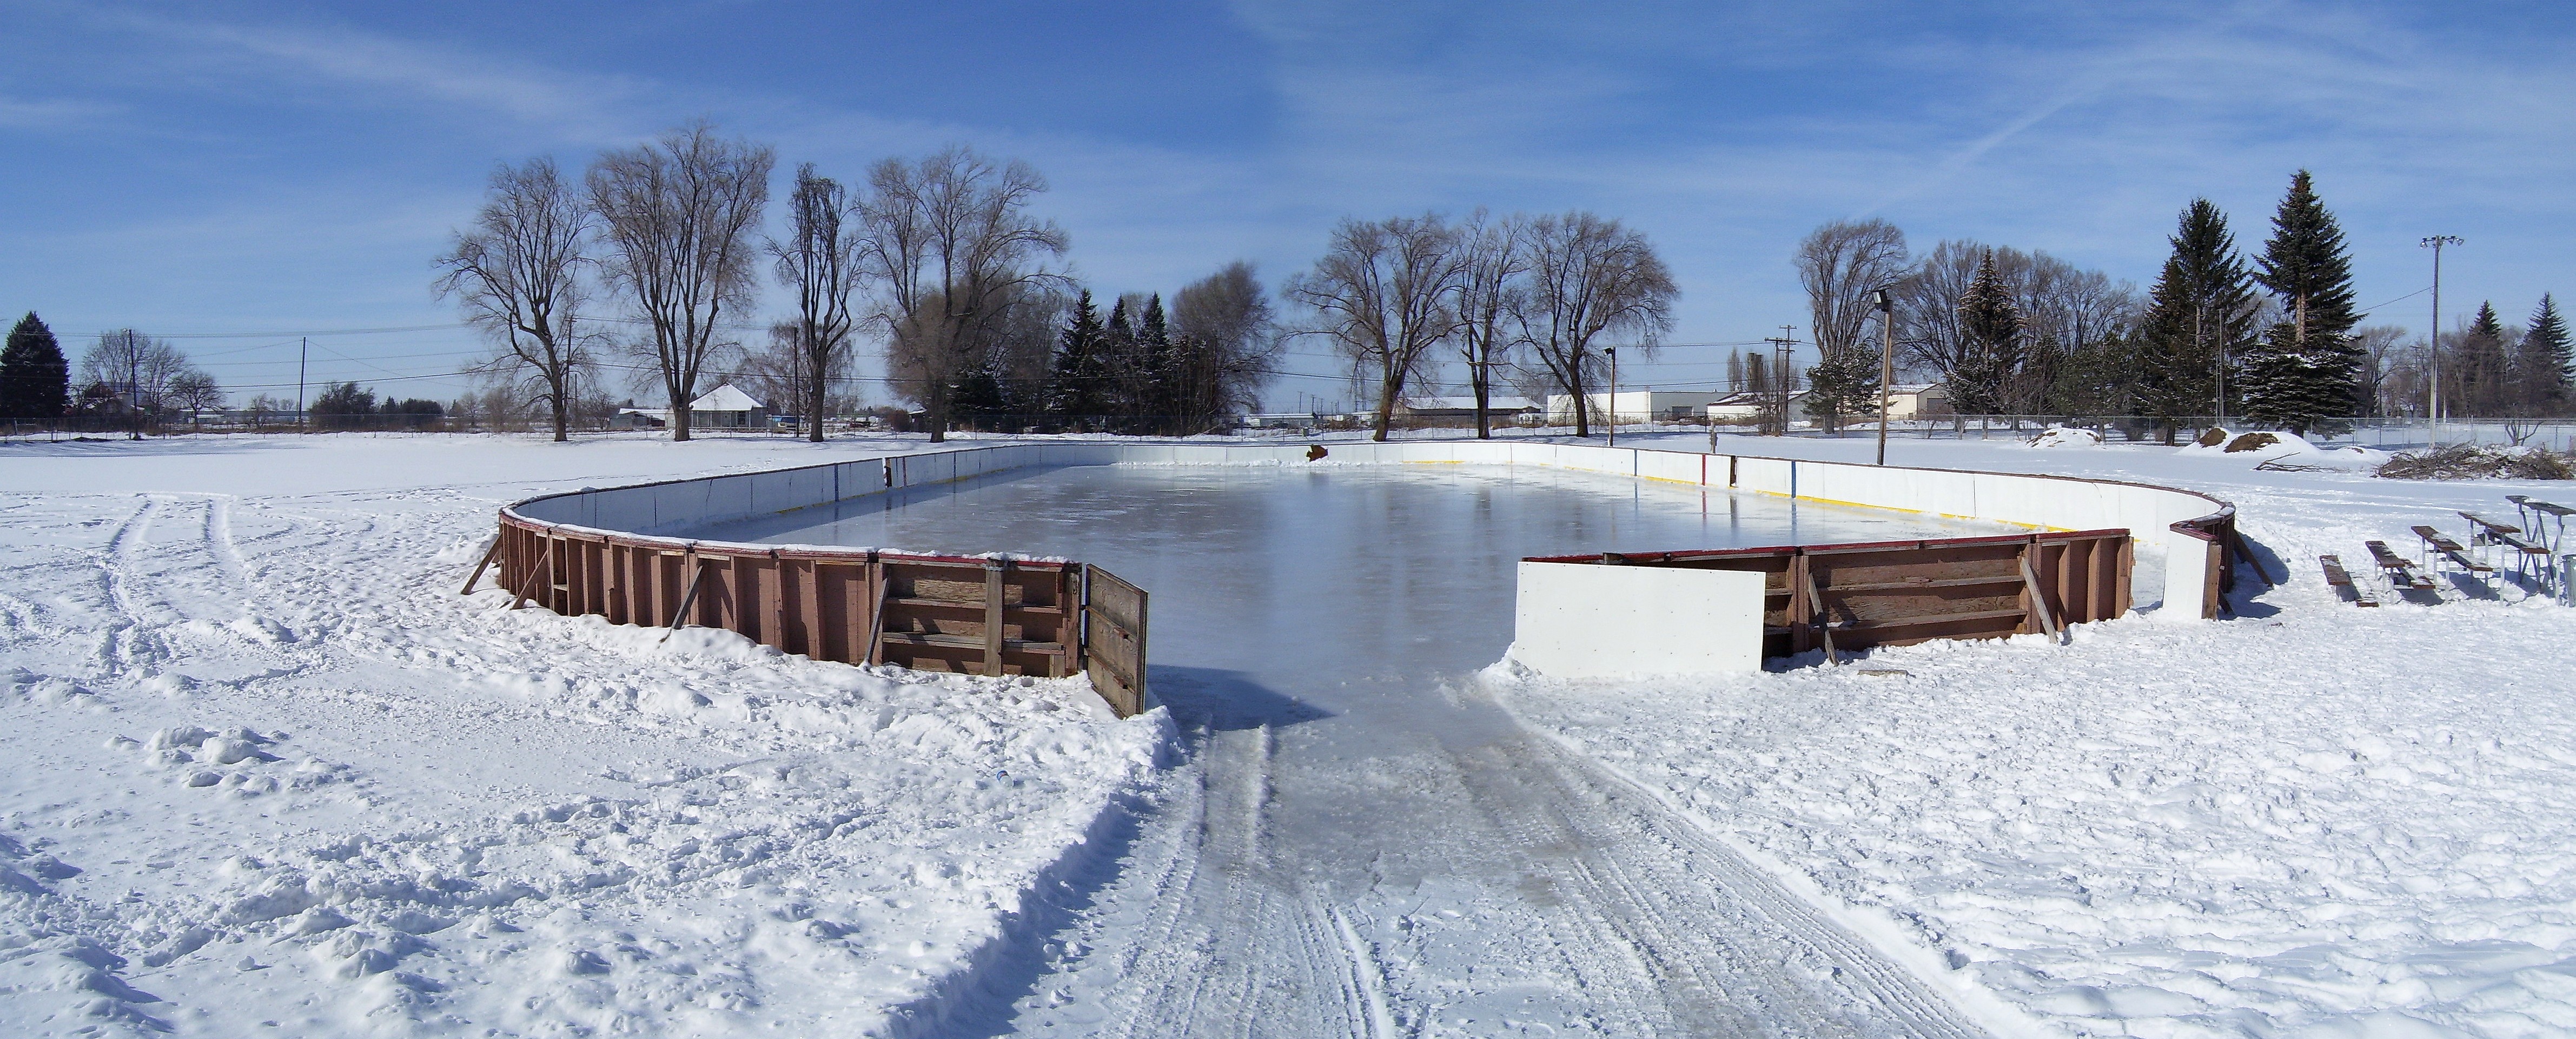 We desperately need outdoor ice skating rink | Improve ...